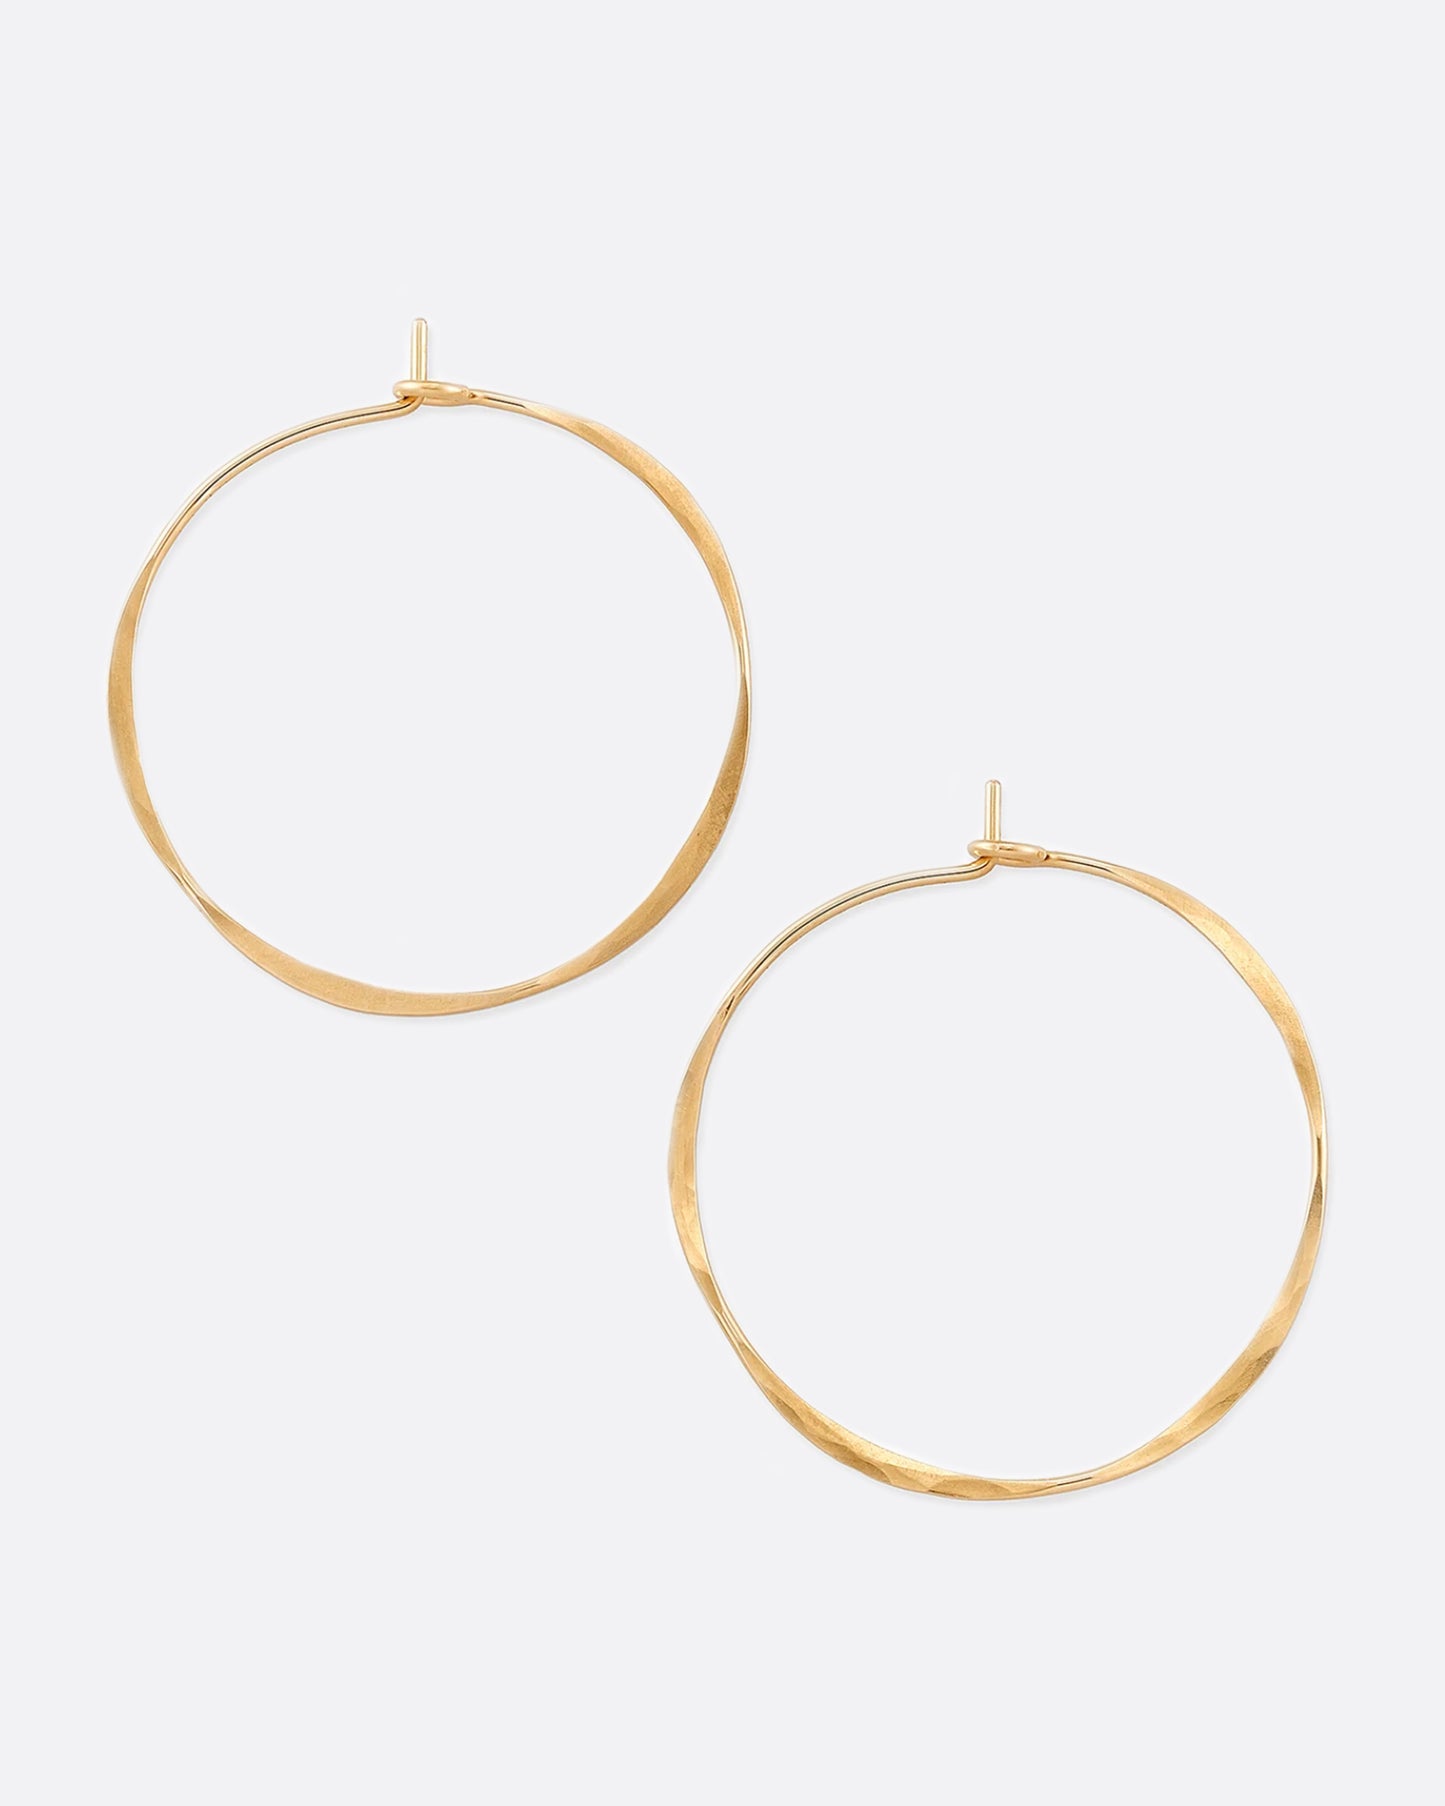 Hand-hammered yellow gold hoops with a comfortable hook closure.